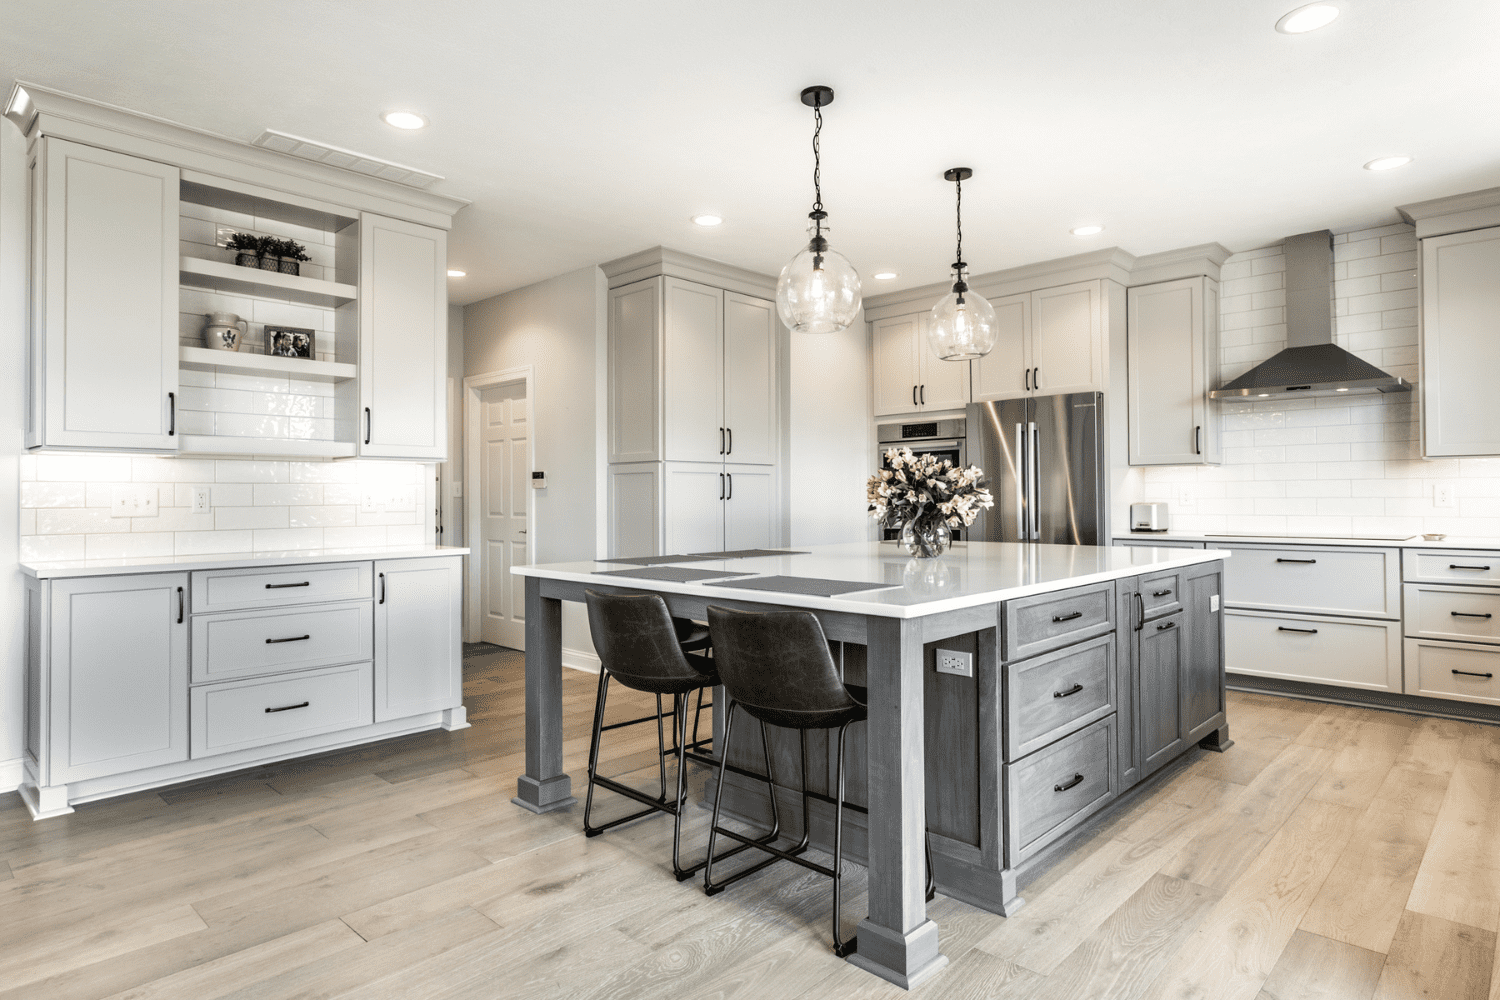 Nicholas Design Build | A kitchen with gray cabinets and a center island.